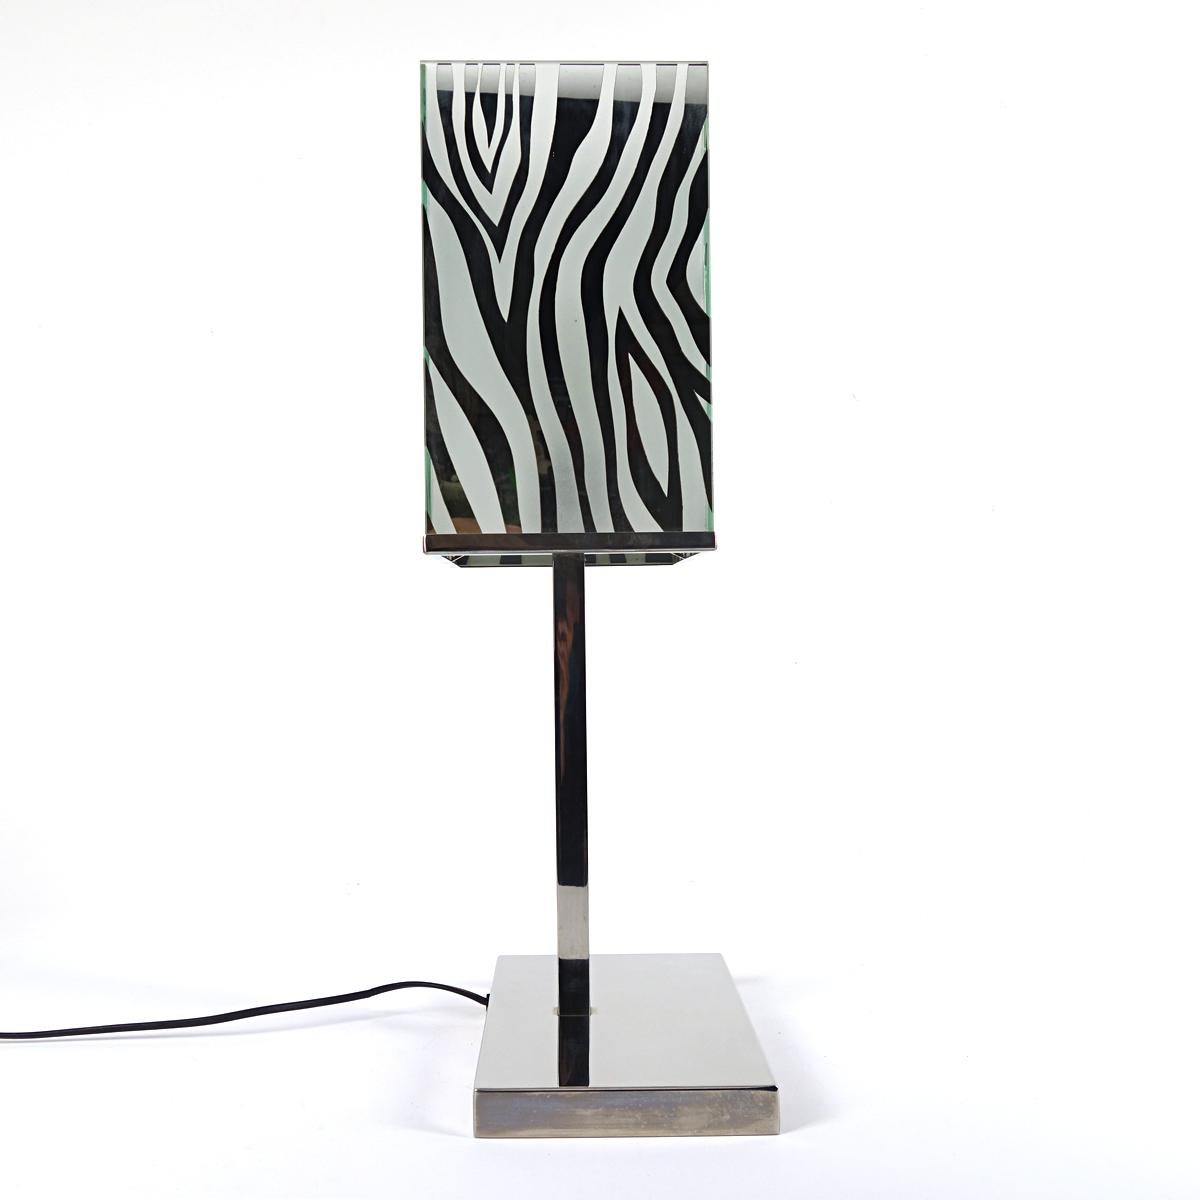 Stylish table lamp with a chrome base and mirror glass shade with zebra print.
By the alternation of mirror glass and zebra print the light shine in a wonderful diffuse manner through the shade.
The base carries the light switch.
A tasteful